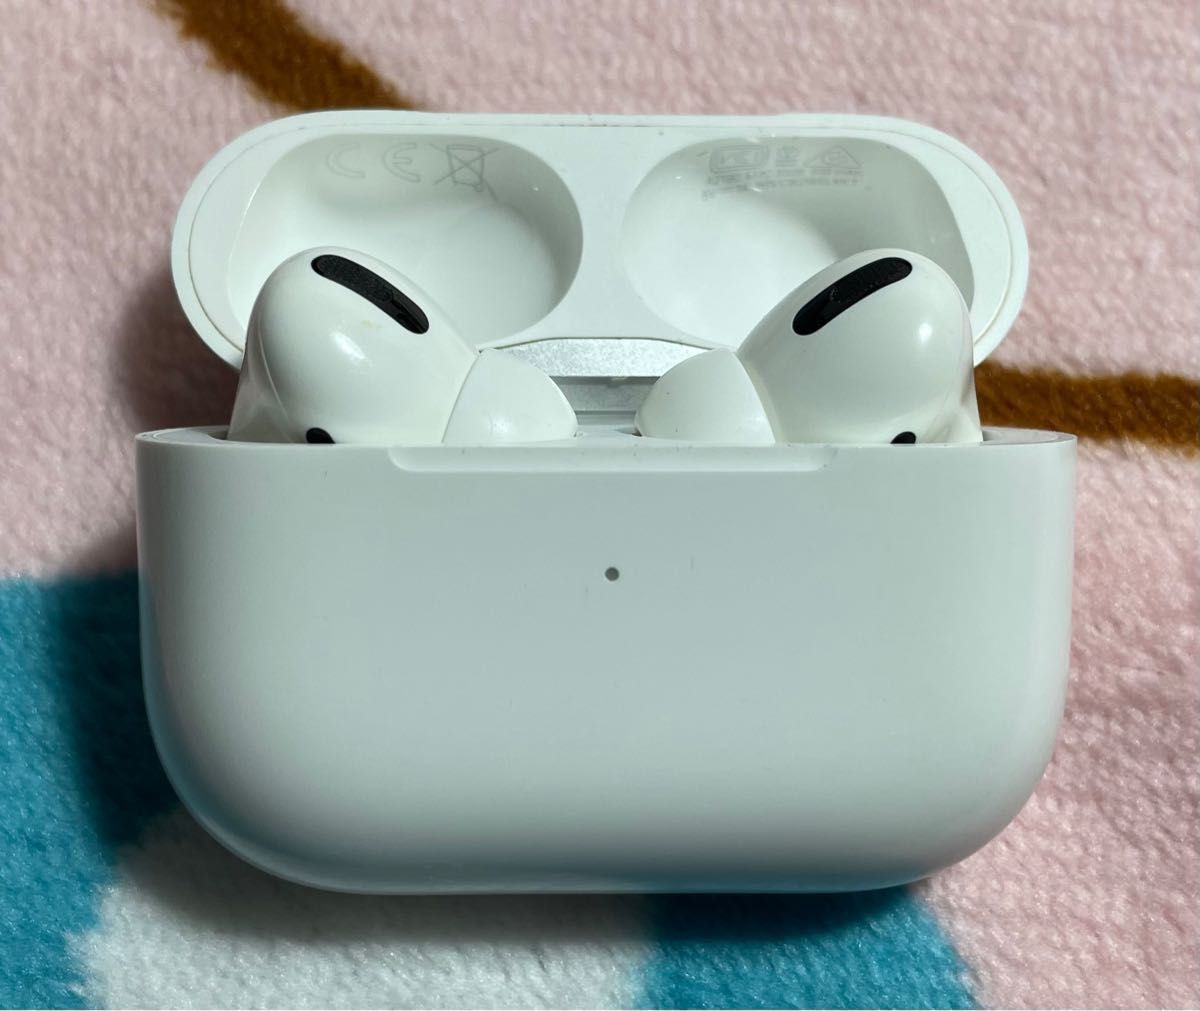 AirPods Pro 第一世代 ジャンク｜PayPayフリマ